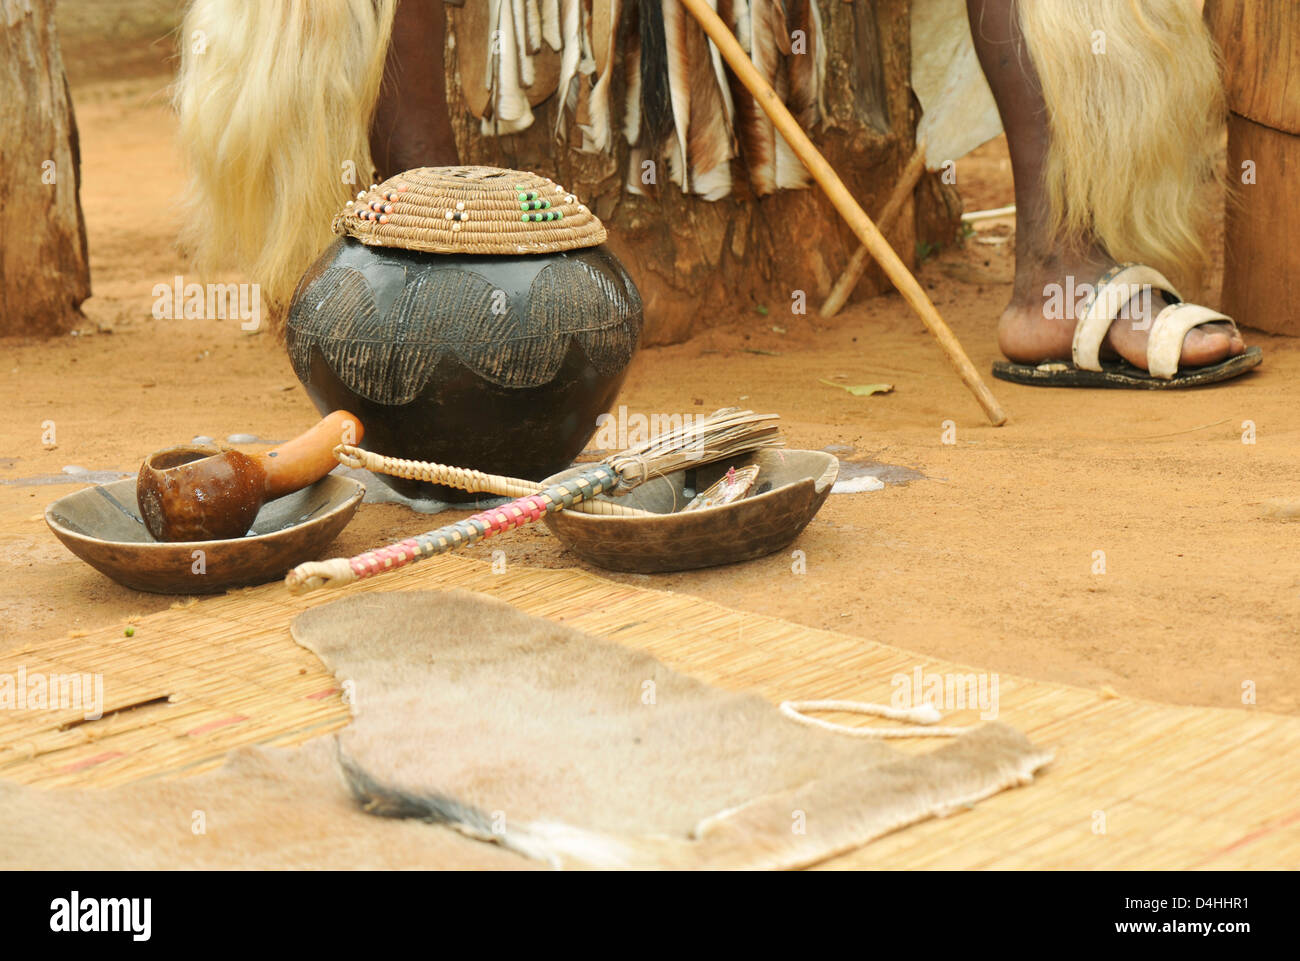 Objects, beverage, traditional Zulu hand crafted clay beer pot, grass lid and serving implements, KwaZulu-Natal, South Africa, ethnic, Cultures Stock Photo